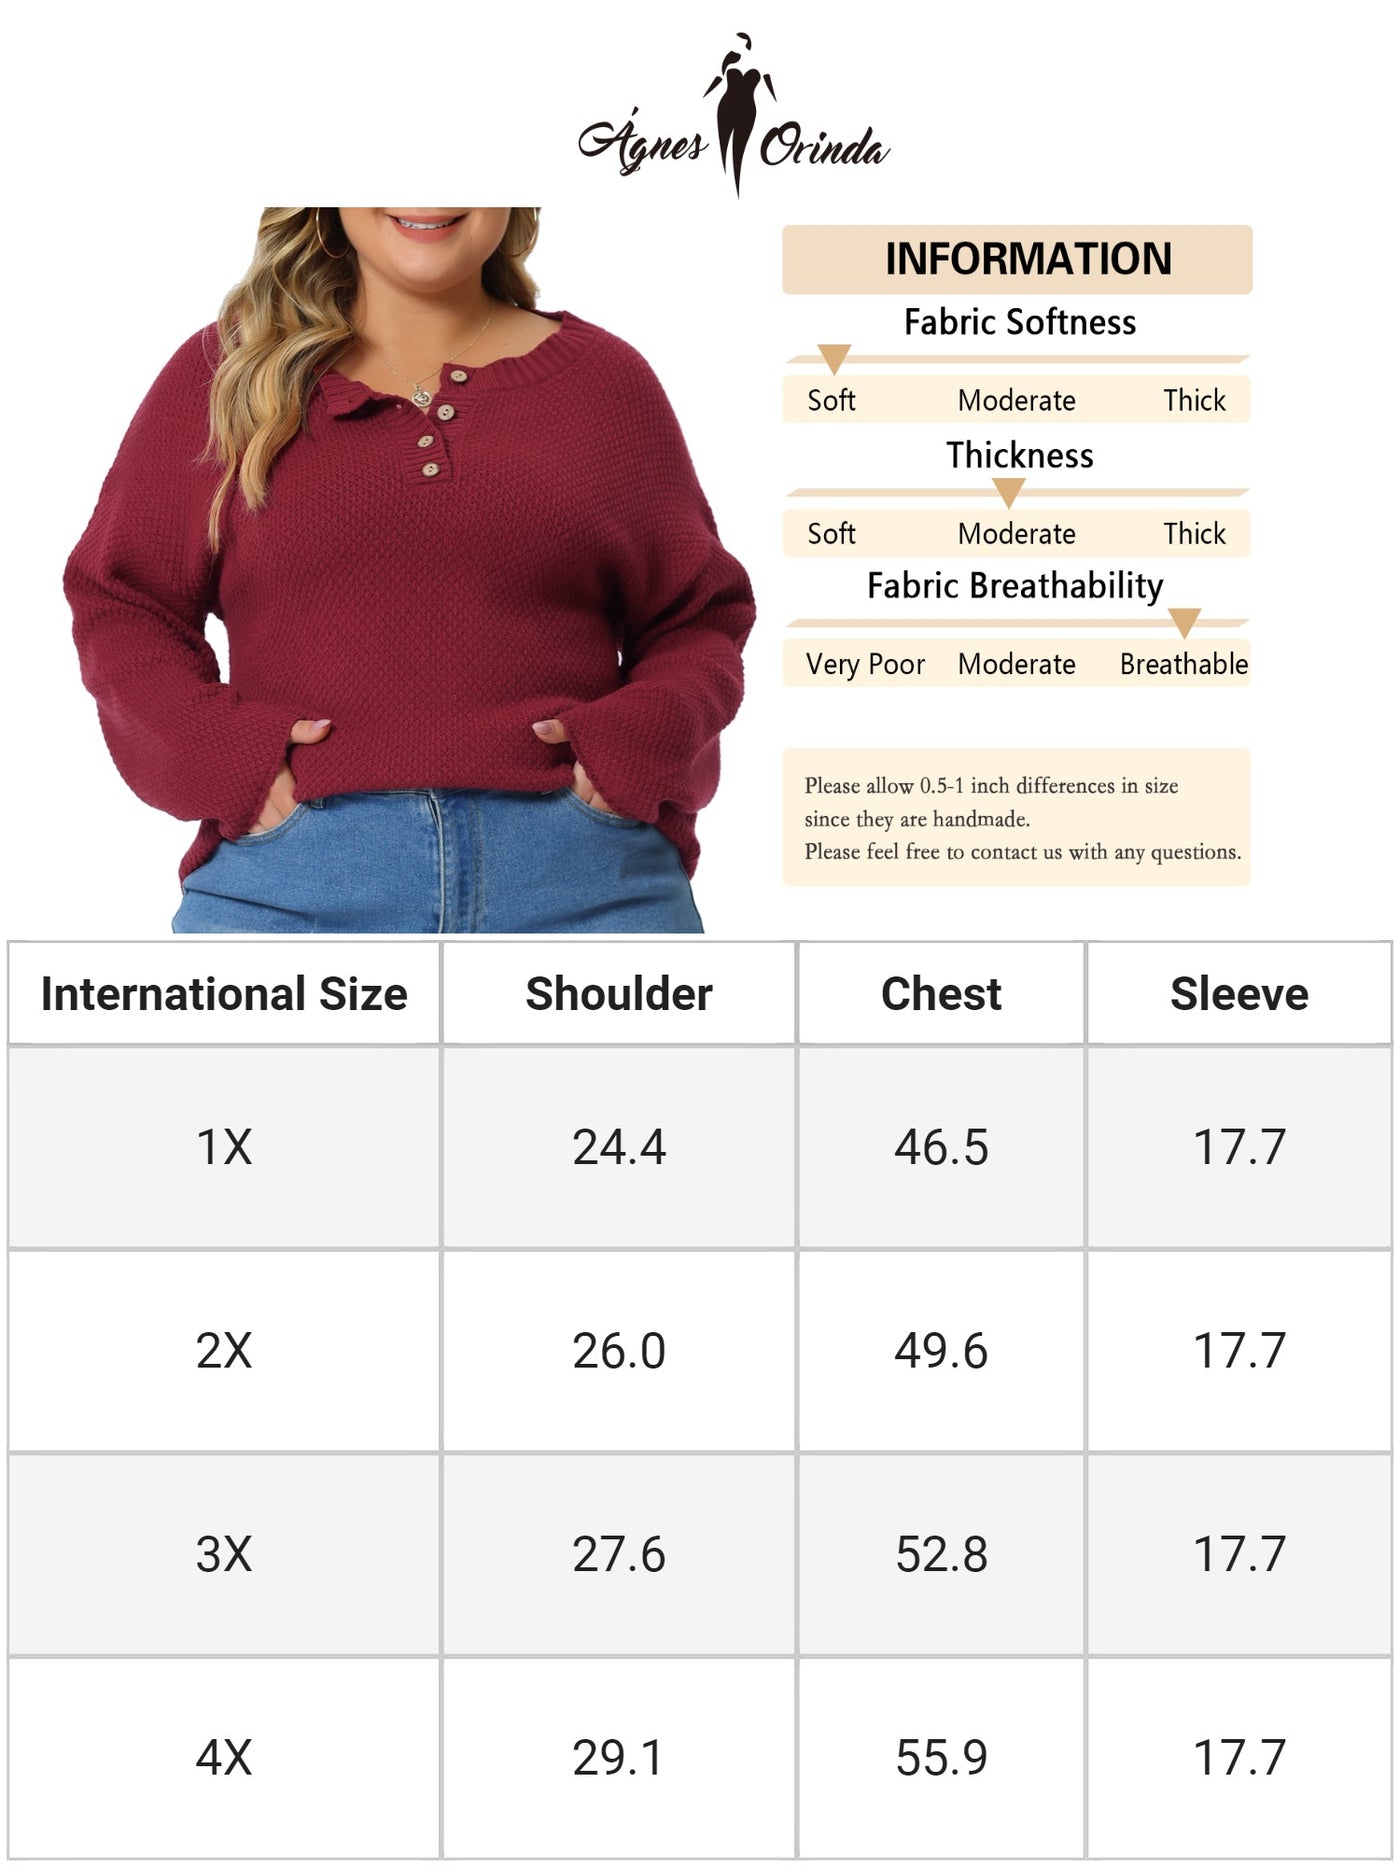 Bublédon Plus Size Oversized Round Neck Long Sleeve Button Knit Pullover Sweater Tops